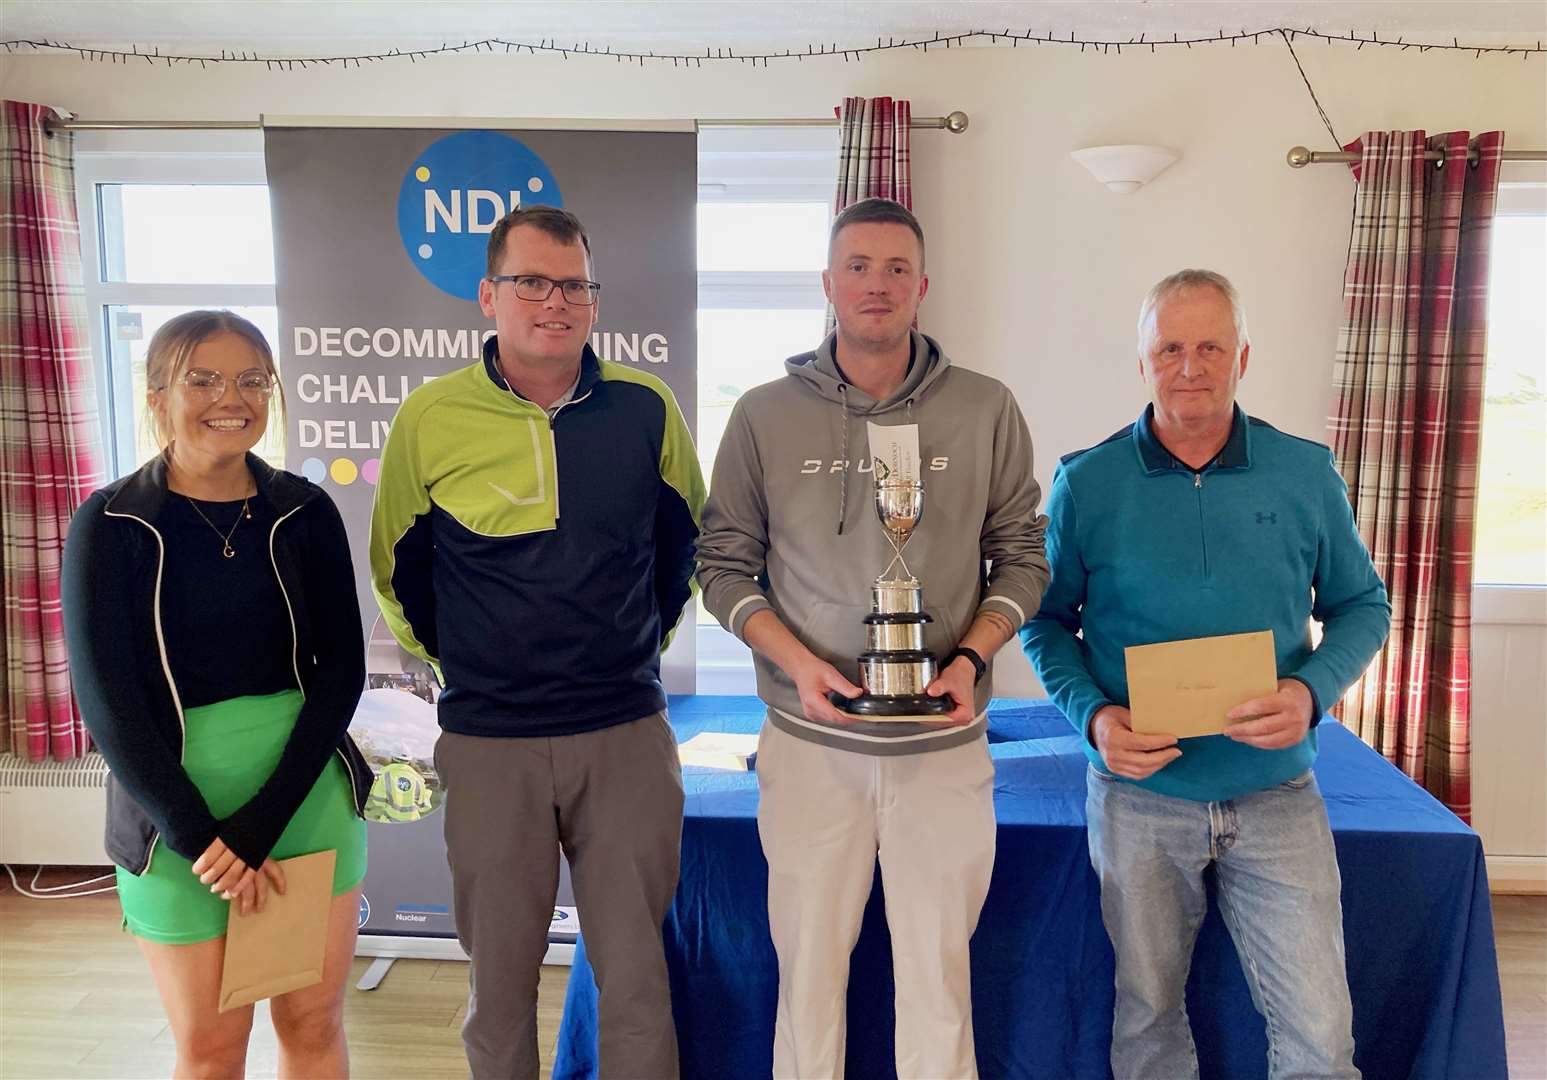 The winning team from Saturday’s Safari Open, the Swingers – (from left) Mollie O’Brien, Brent Munro, Lee Malcolm and Leslie Malcolm.